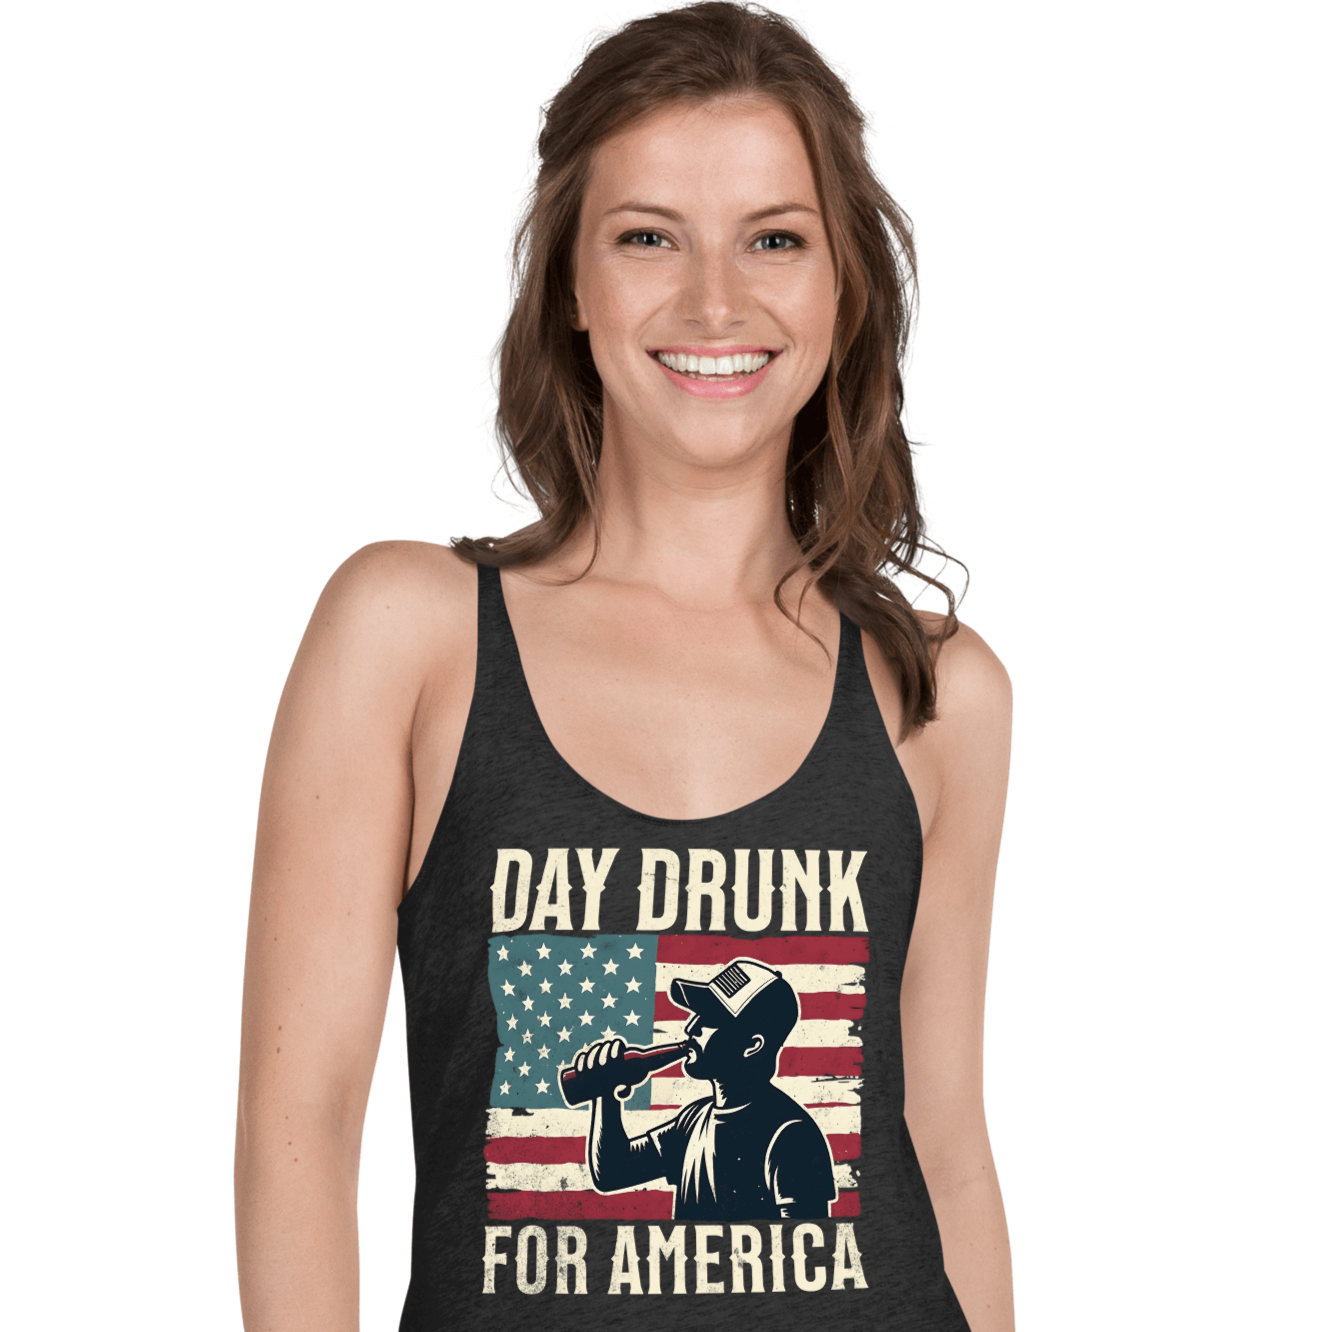 Racerback tank with Day Drunk for America text, silhouette of a man drinking a bottle of beer, and distressed American flag background. Perfect for 4th of July.